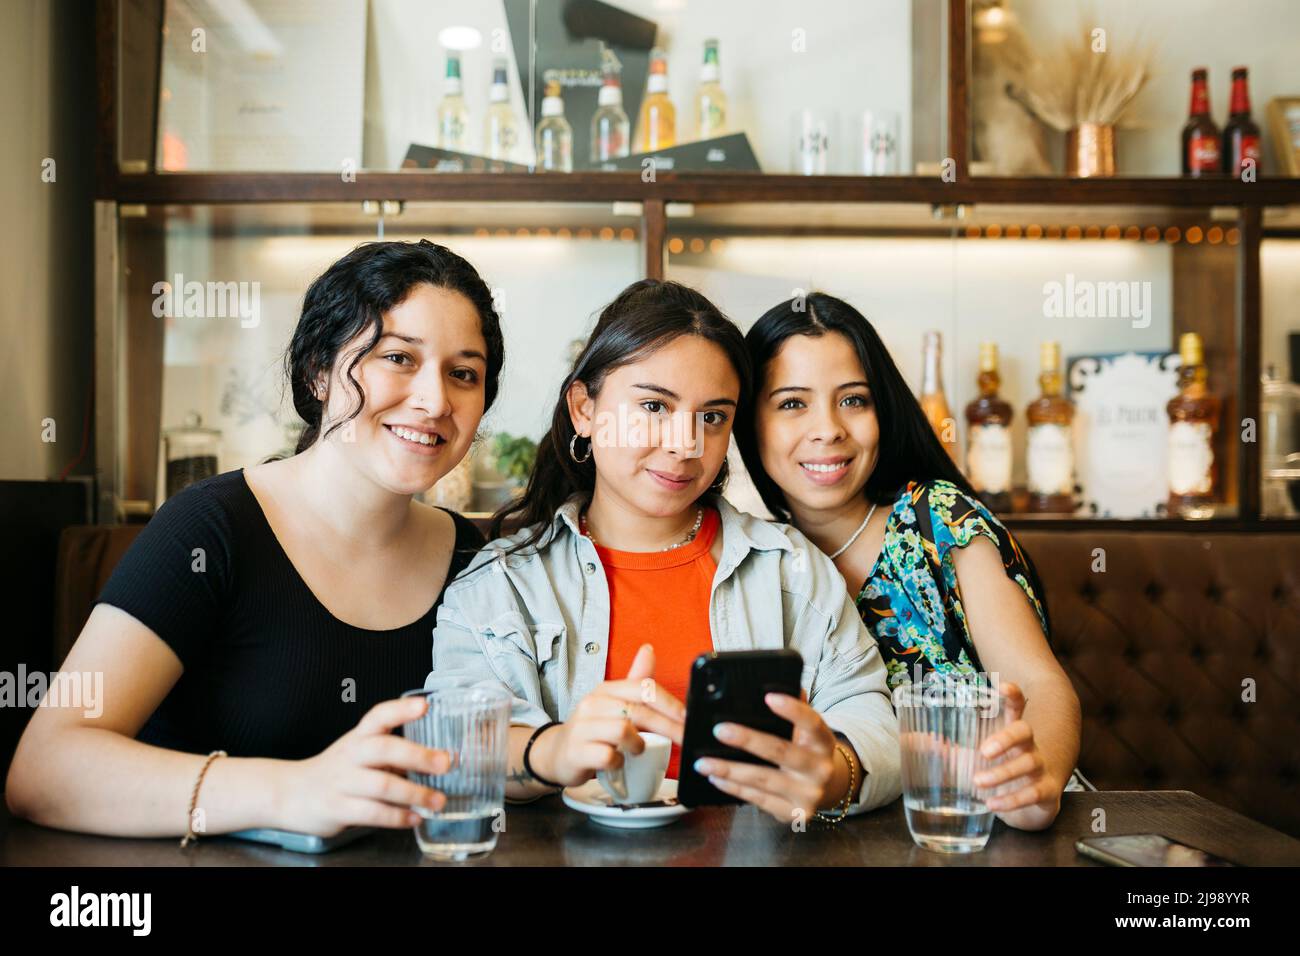 Portrait of three young women looking at the camera in a restaurant Stock Photo